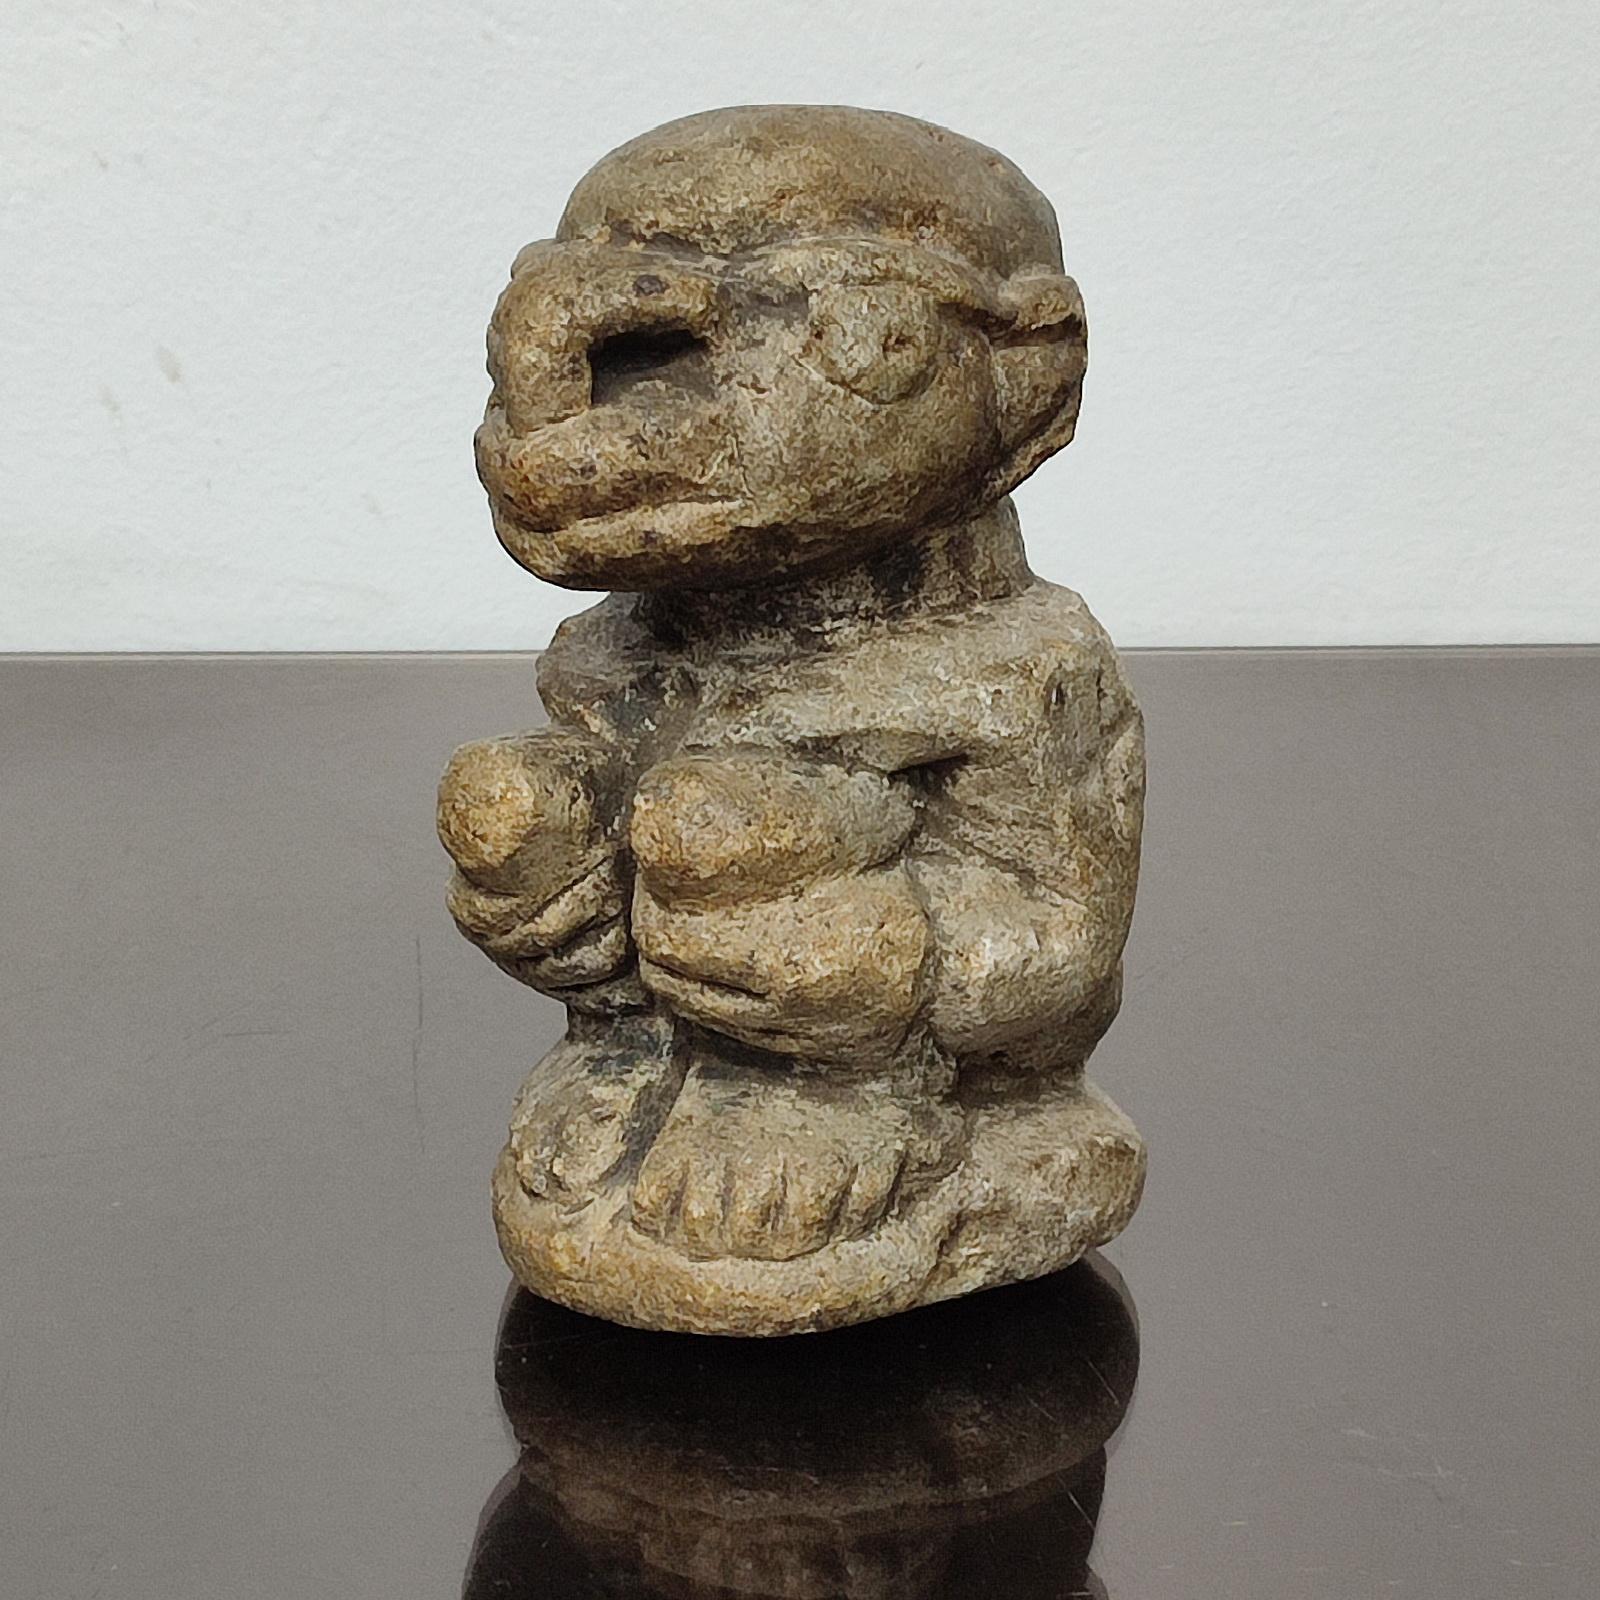 A Kisii Nomoli carved stone figure, a male with his hands wrapped around his knees, on a base; from the Kissi people of Sierra Leone.
Greyish brown patina, snout-like mouth, large nose, slight traces of abrasion.
Such figures were used in